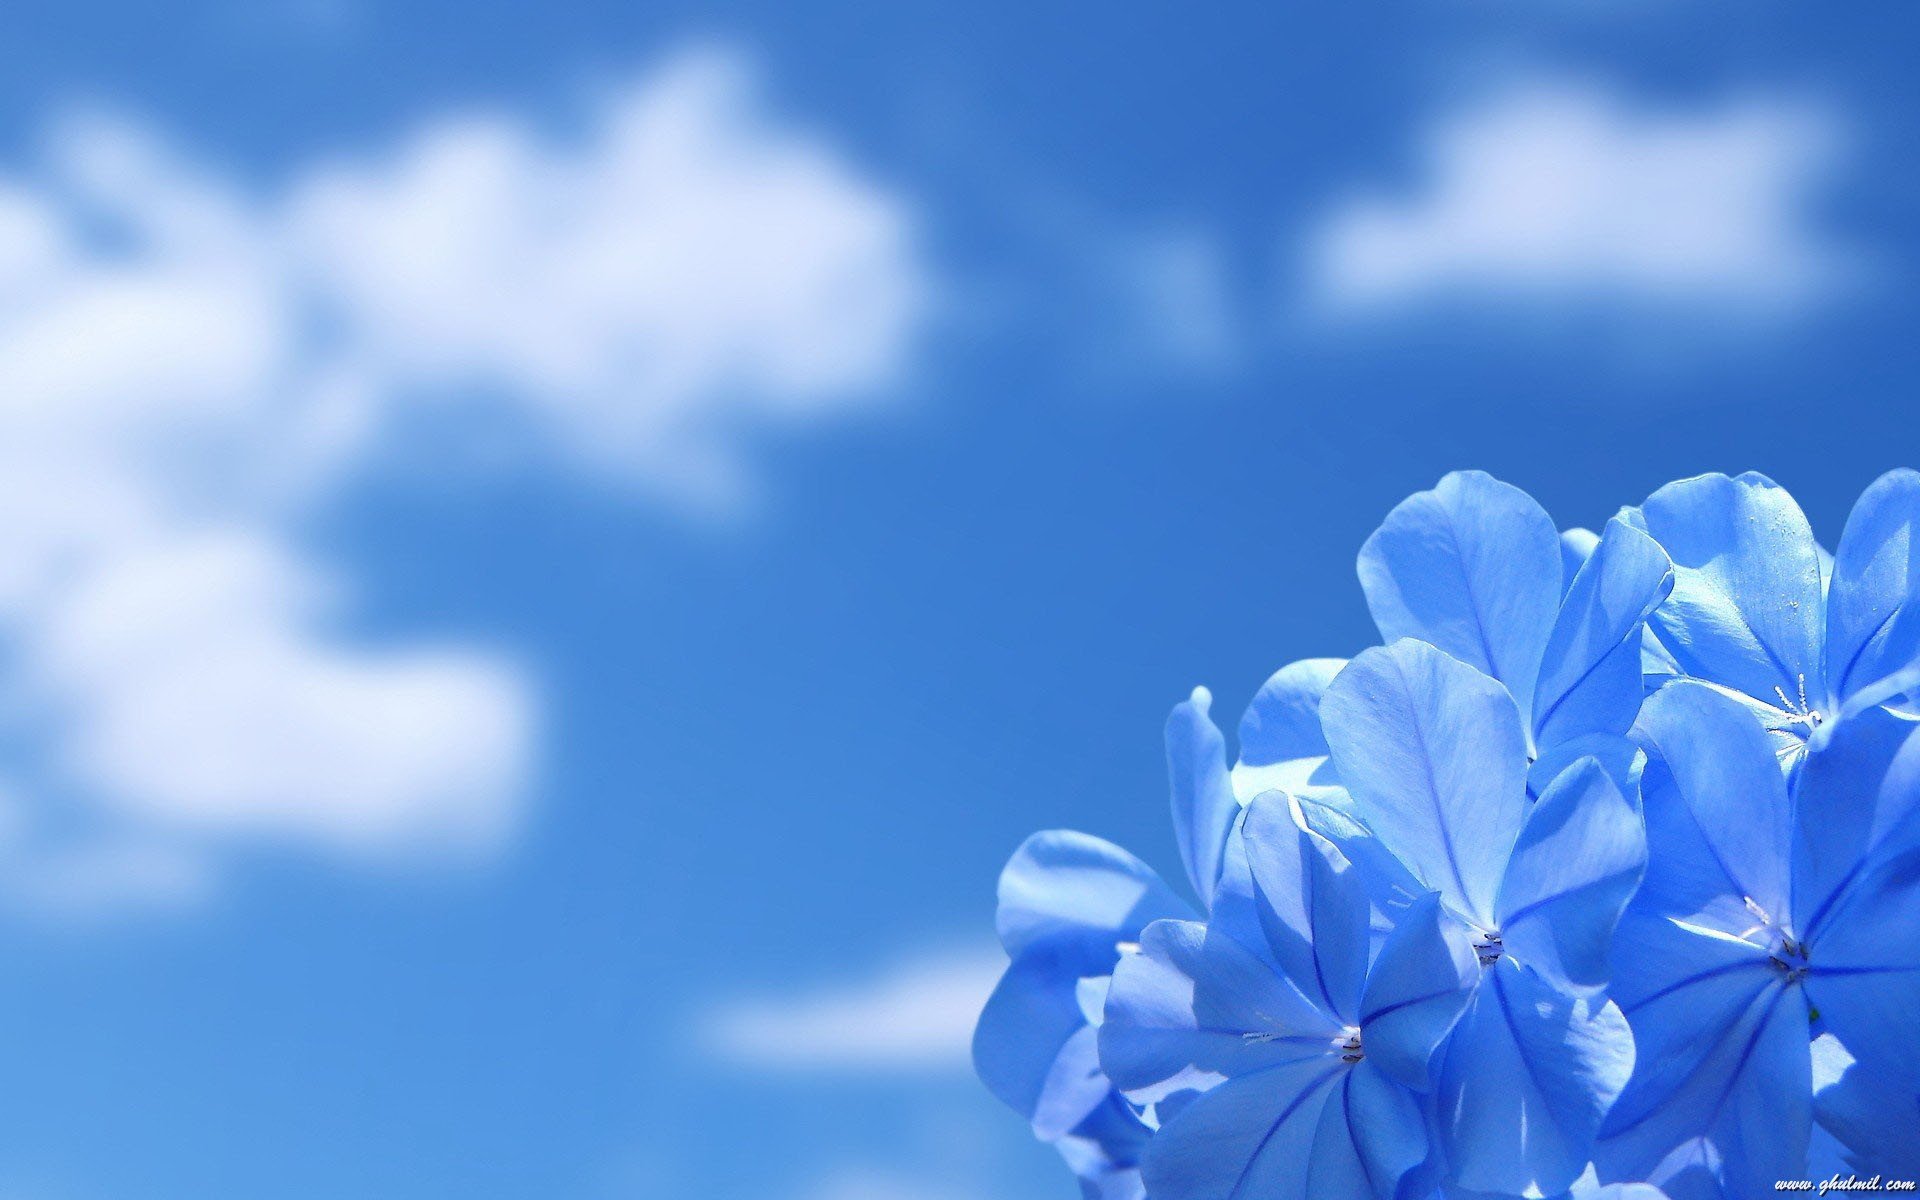  Sky Blue Natural High Quality HD Wallpapers E Entertainment